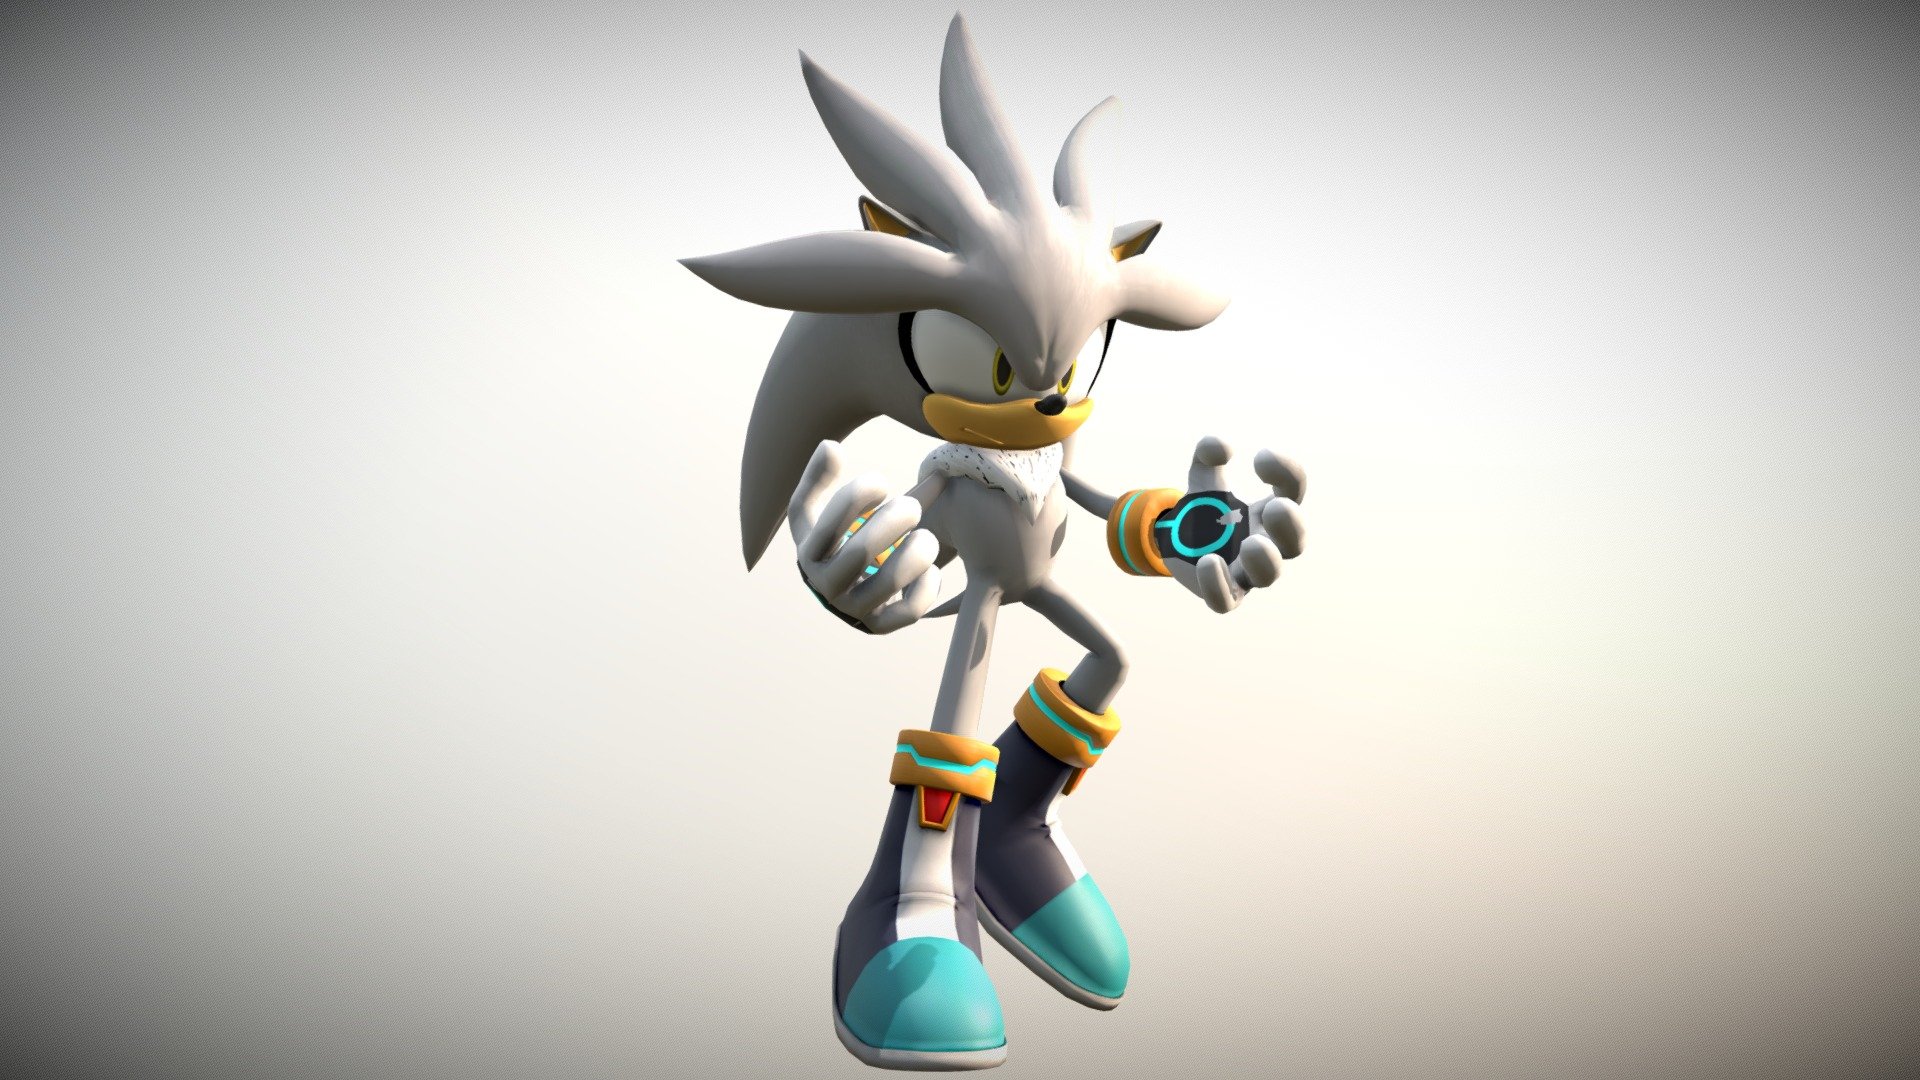 Silver The Hedgehog free to download, but if you use it for anything please give credit to me the creator. Thank you - silver the hedgehog - Download Free 3D model by HiddenMatrixYT 3d model